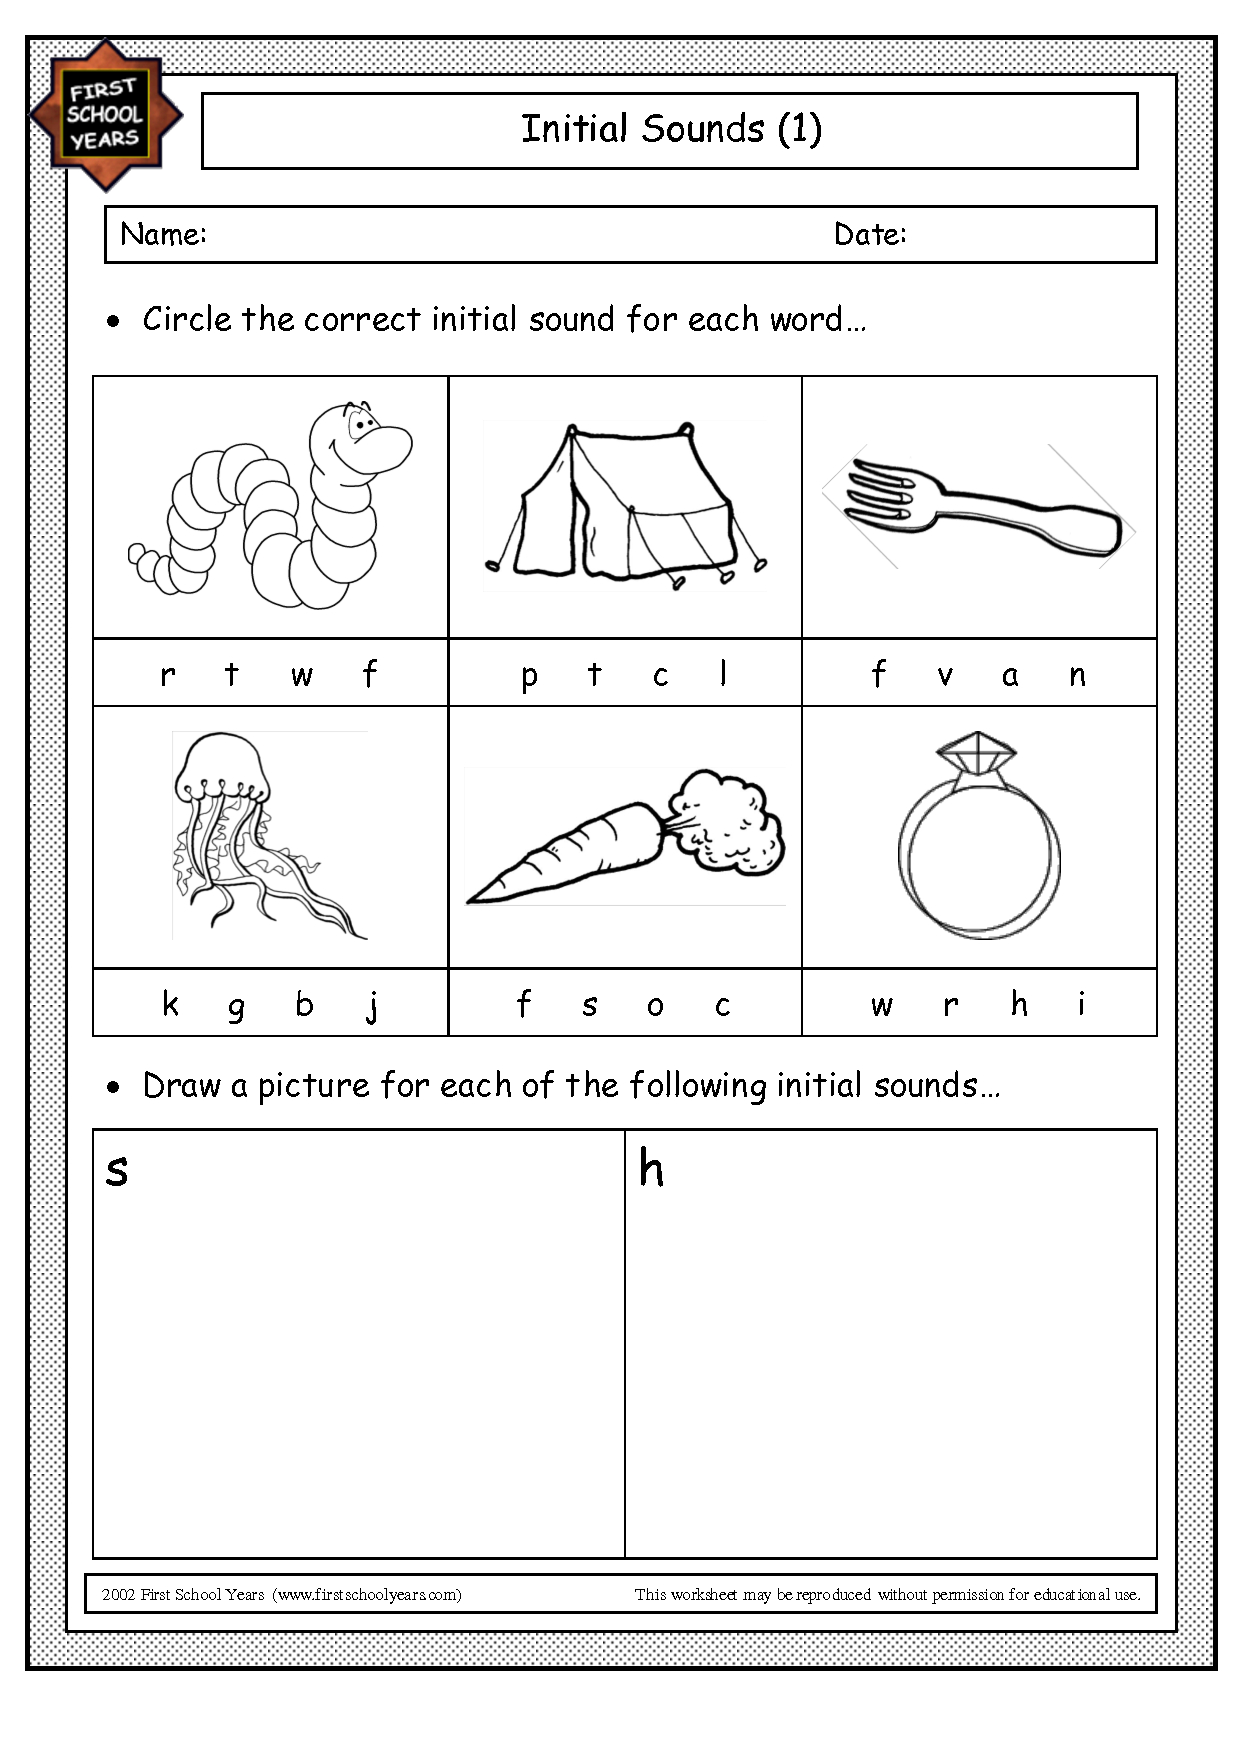 Jolly Phonics Worksheets Phonics Worksheets D | Jolly pertaining to Alphabet Sounds Worksheets Pdf